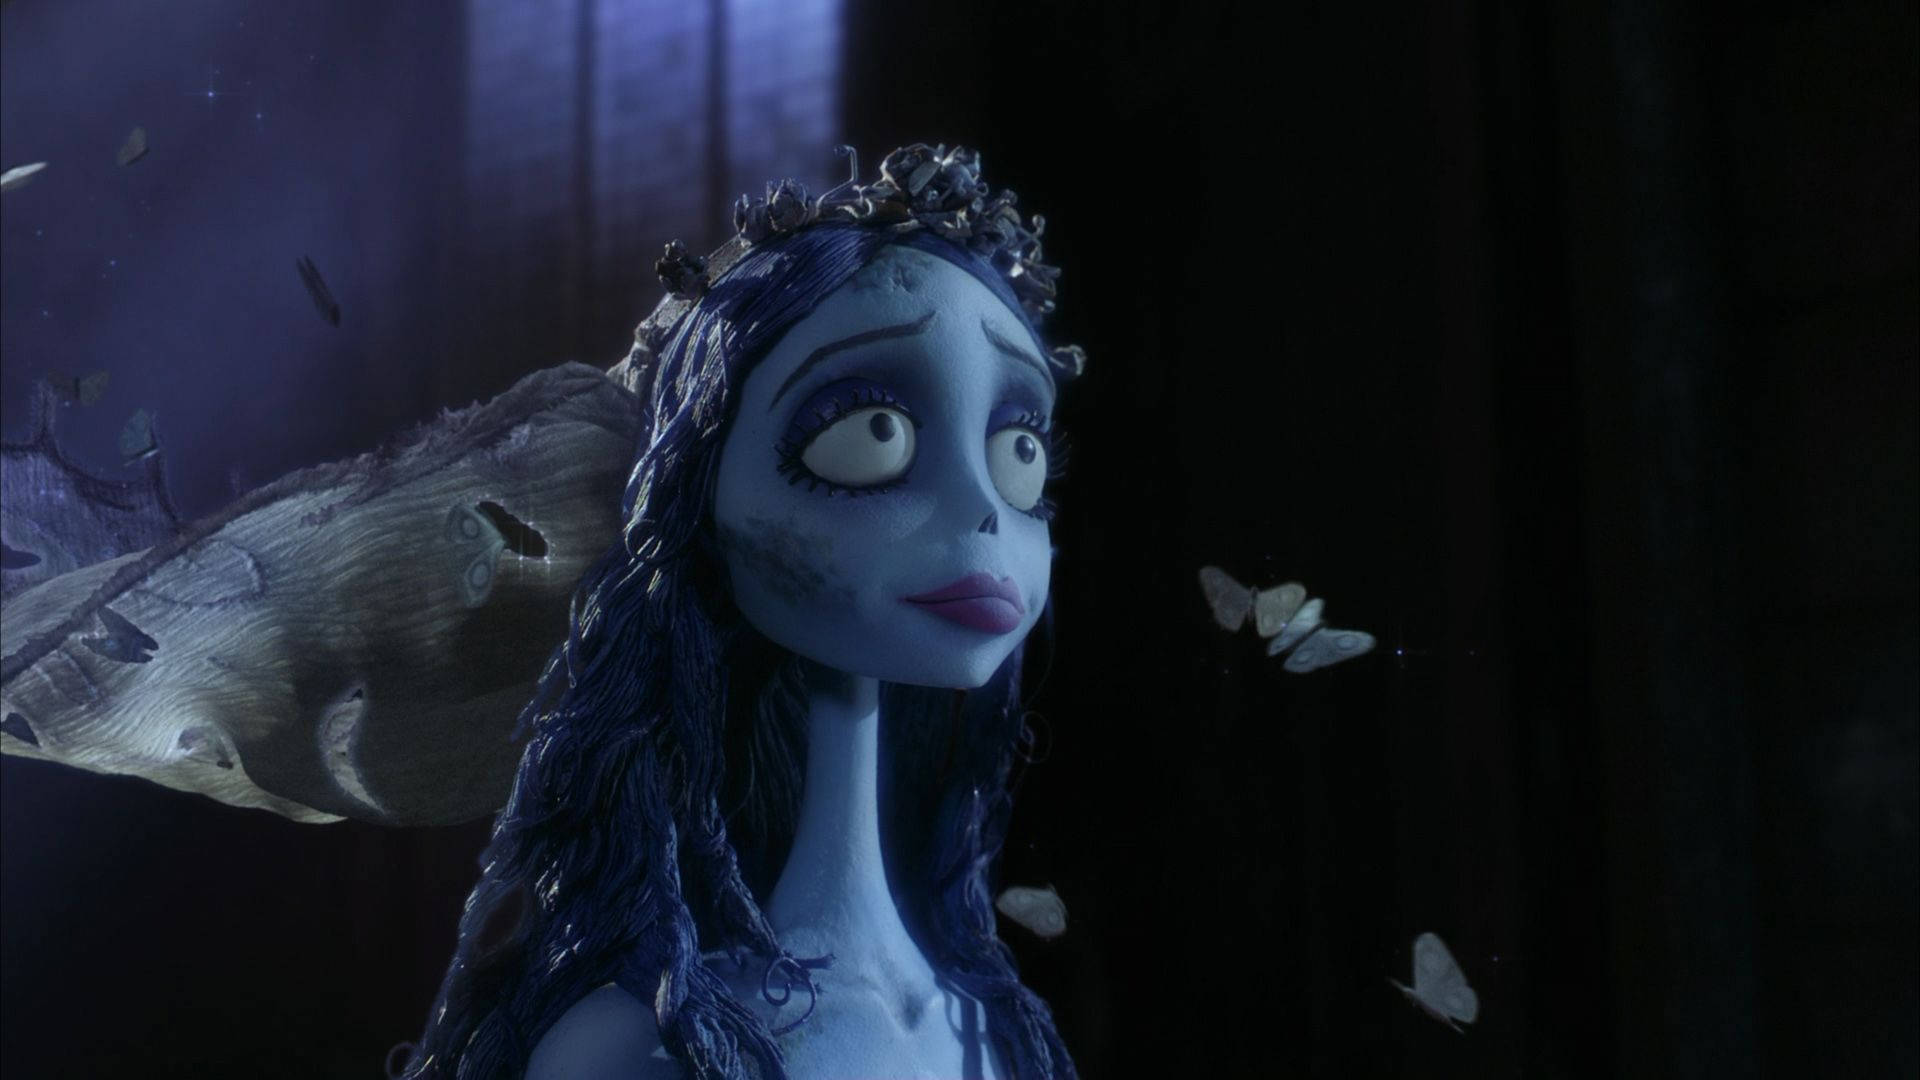 Corpse Bride Surrounded By Butterflies Wallpaper